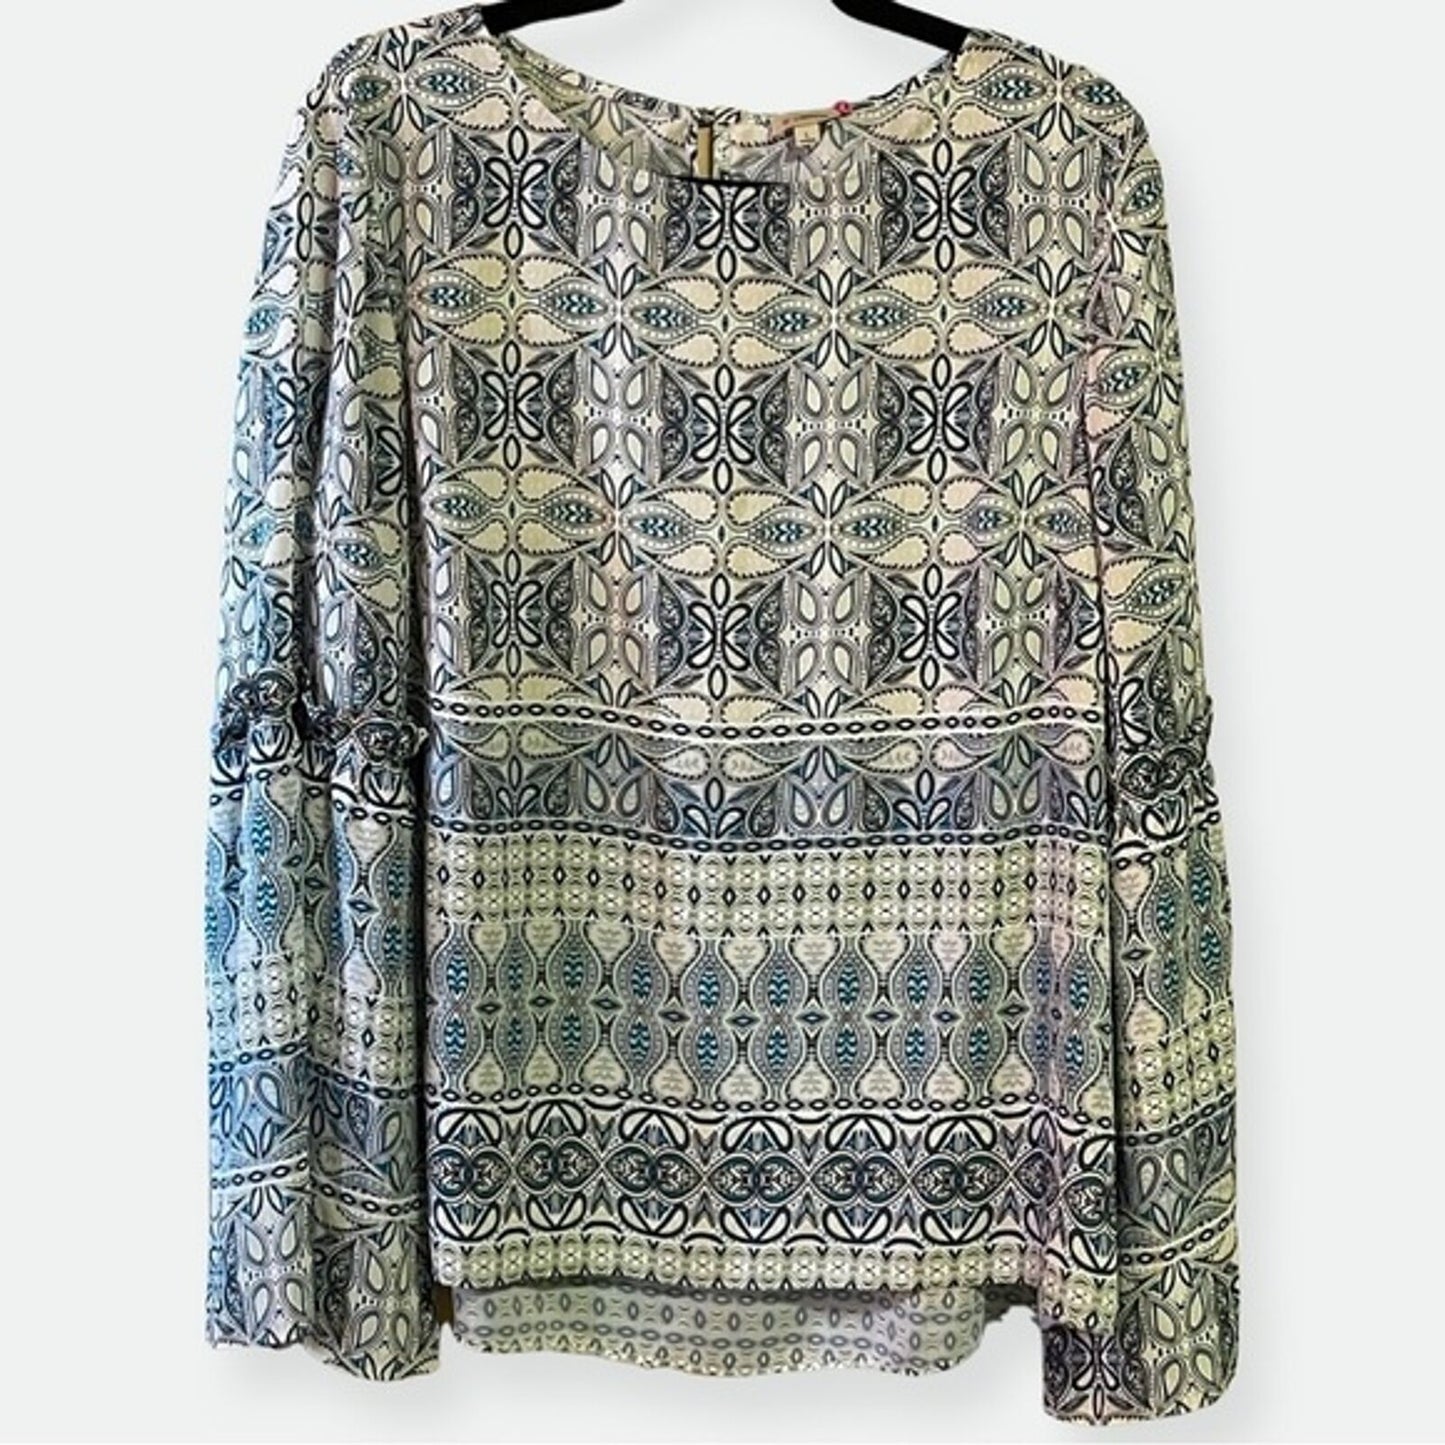 Cremieux NEW Boho Sheer Geometric Paisley Bell Sleeve Top Tunic Blouse Size L